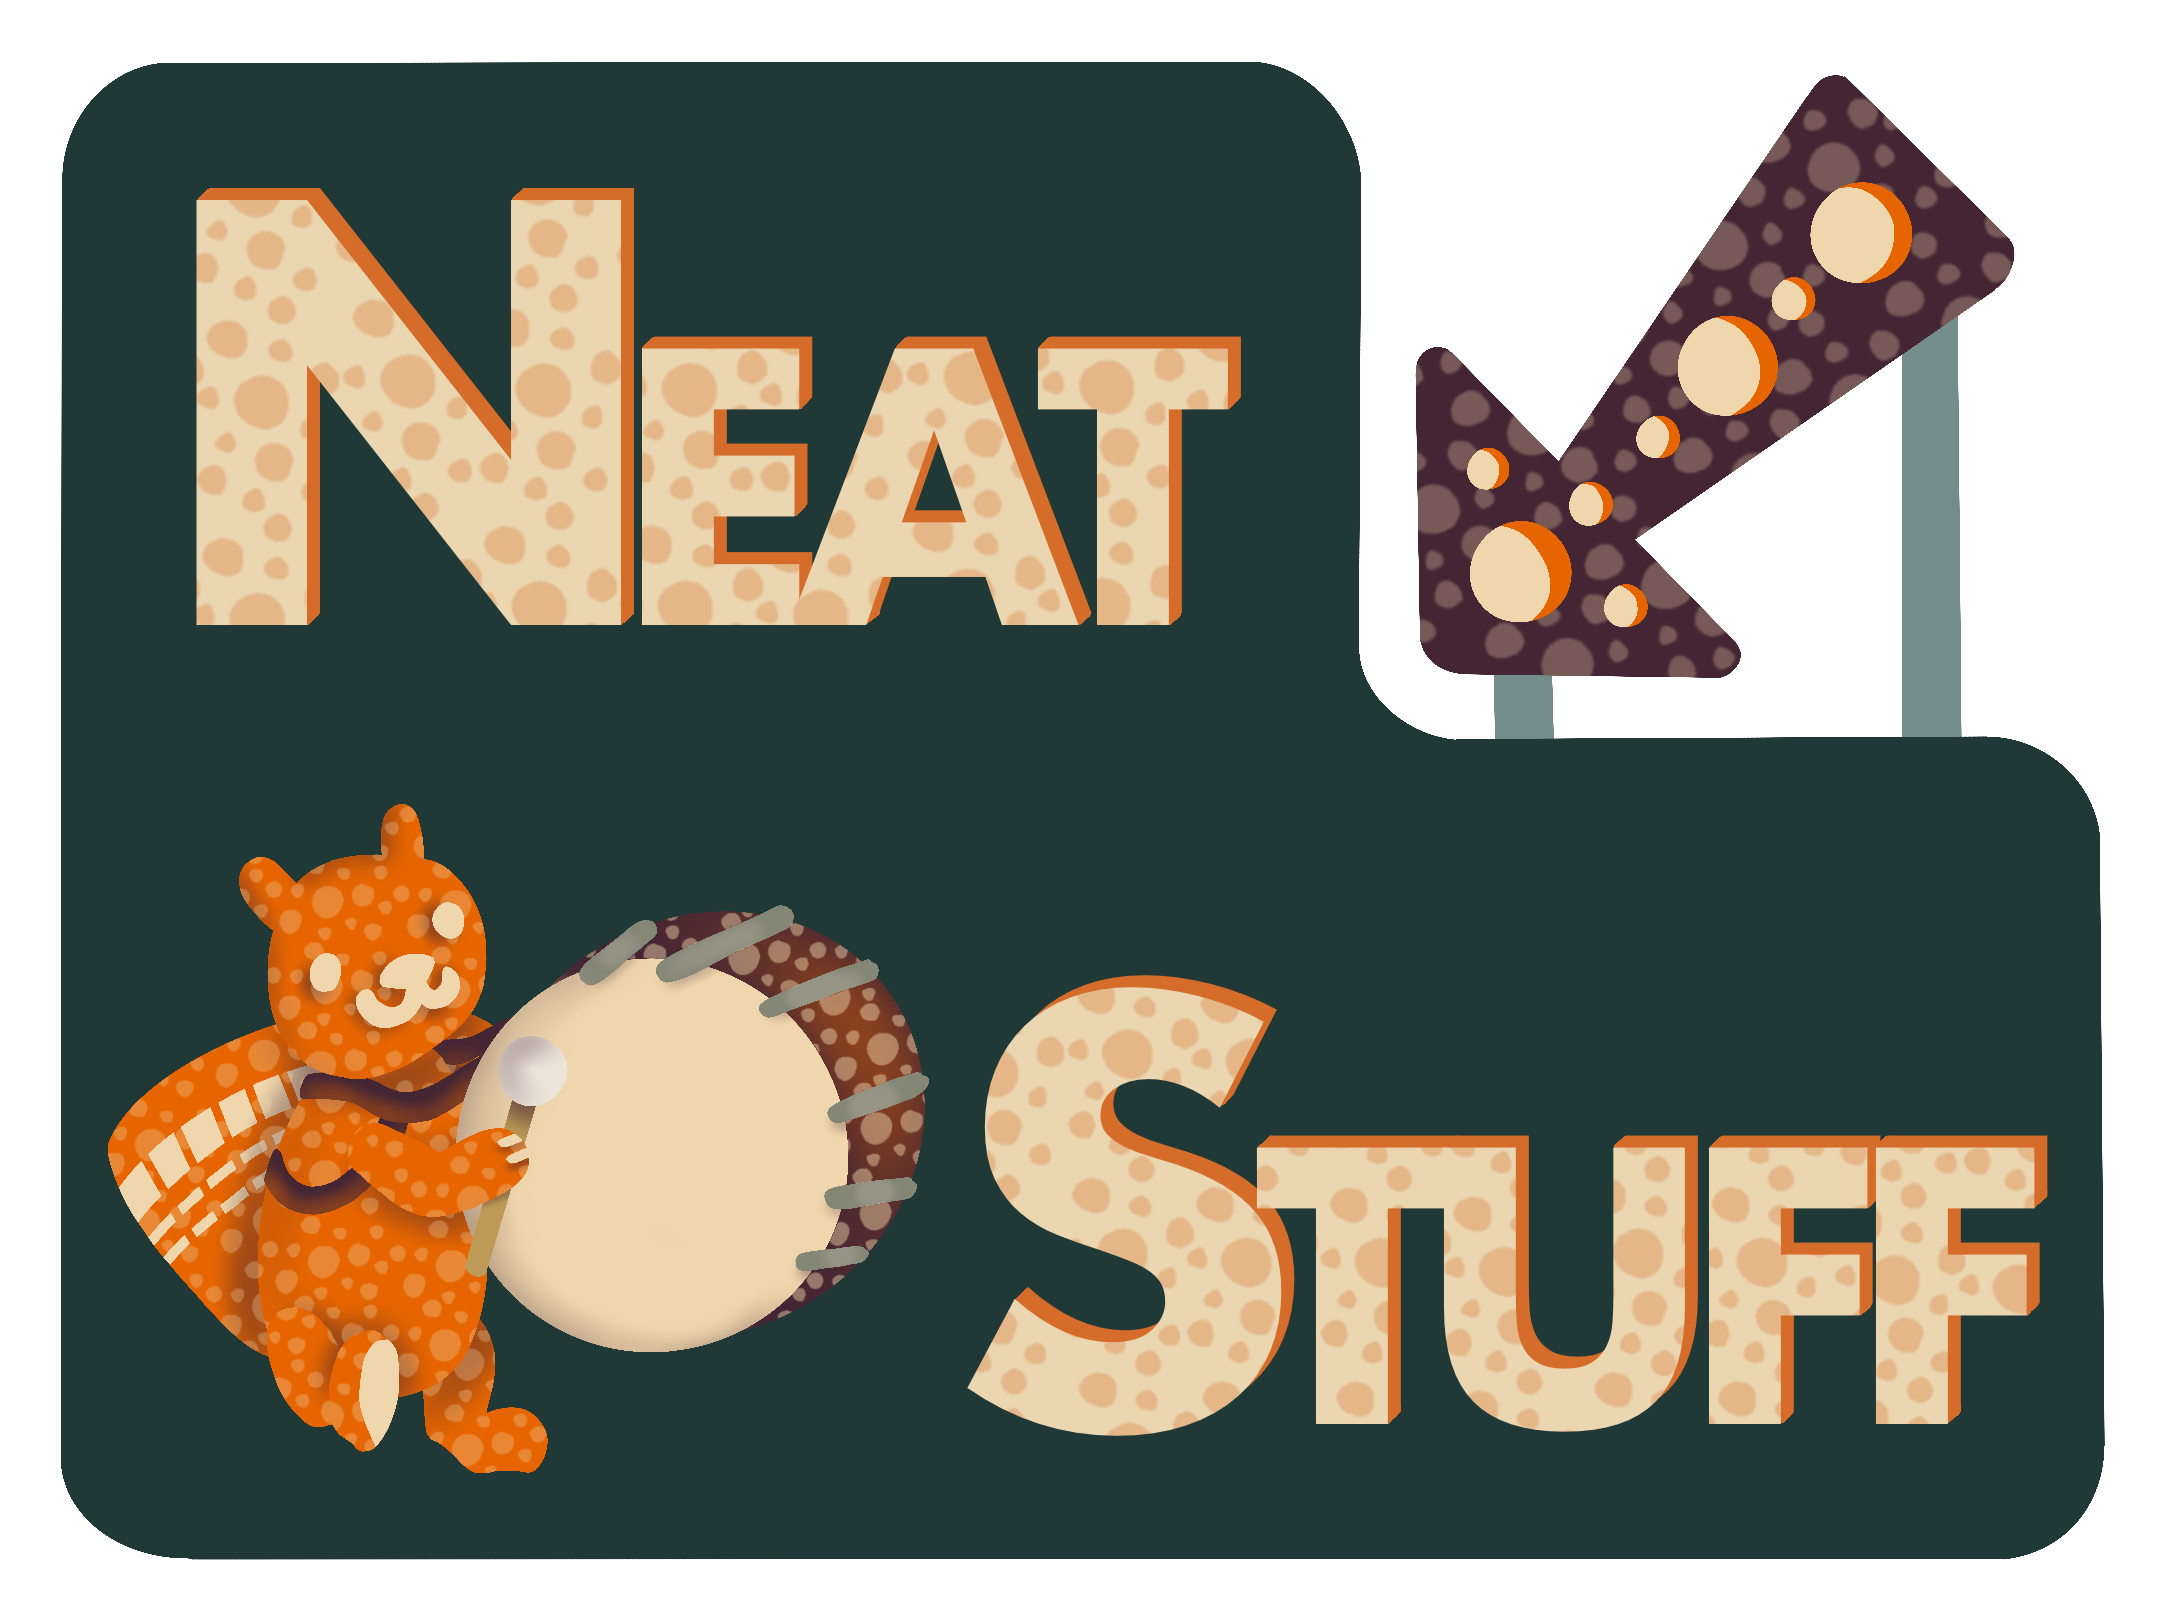 A heading image titled 'Neat Stuff'. In between the text is a drawing of a orange part squirrel part turkey creature playing a bass drum.